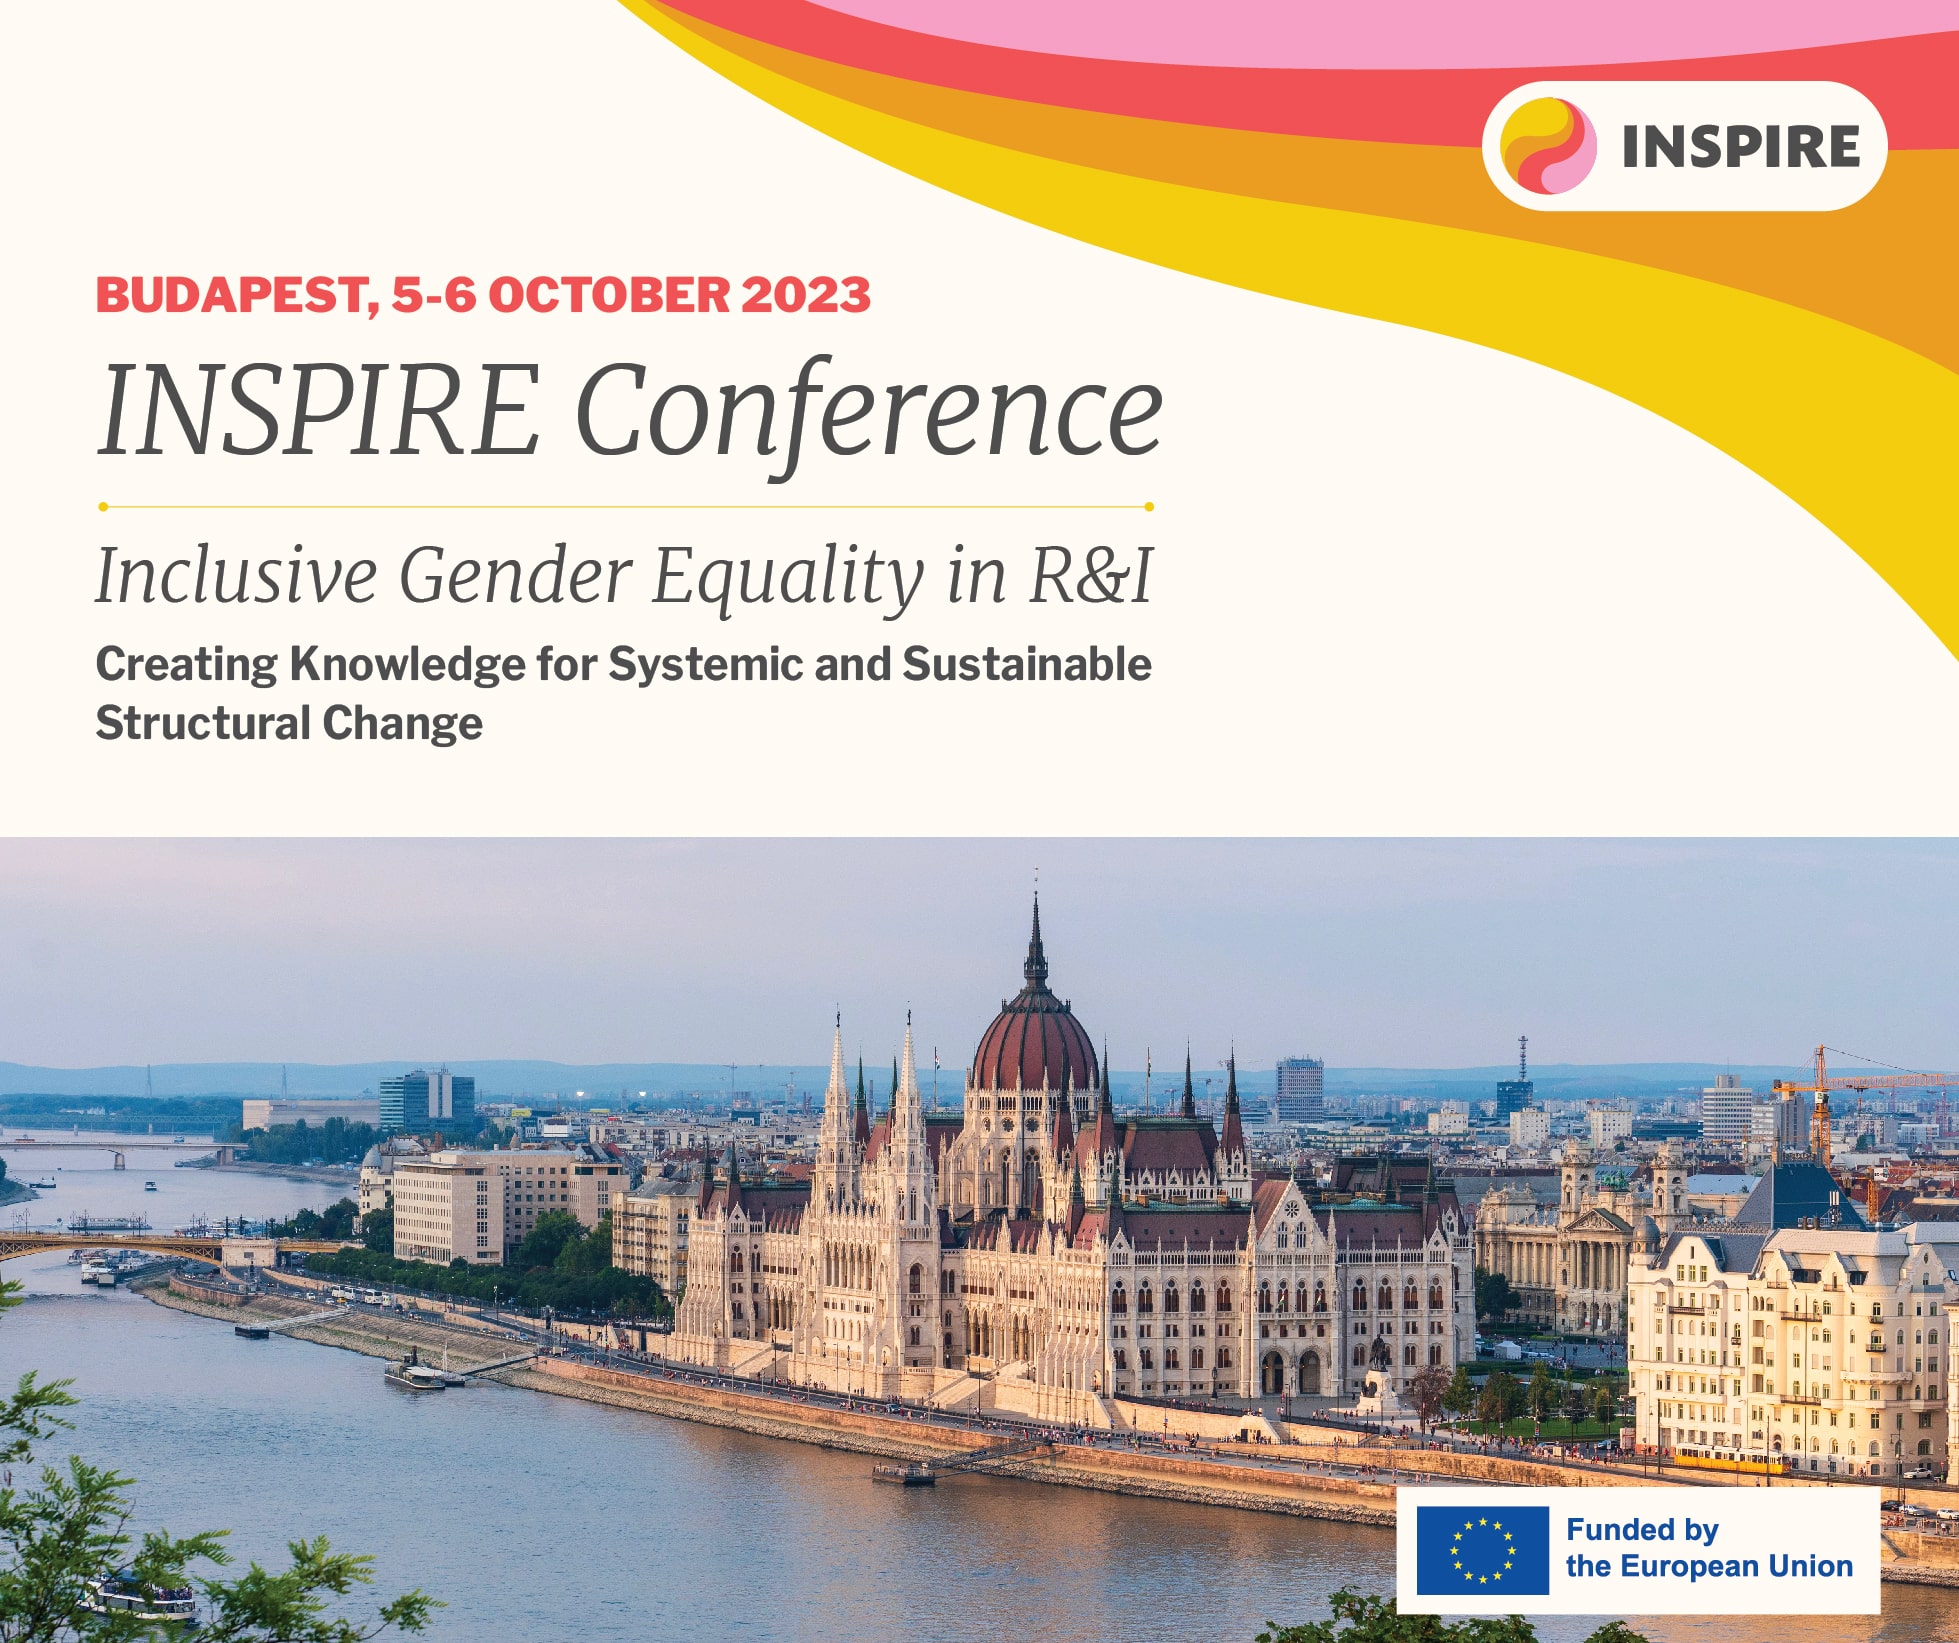 INSPIRE Conference | Inclusive Gender Equality in R&I: Creating Knowledge for Systemic and Sustainable Structural Change